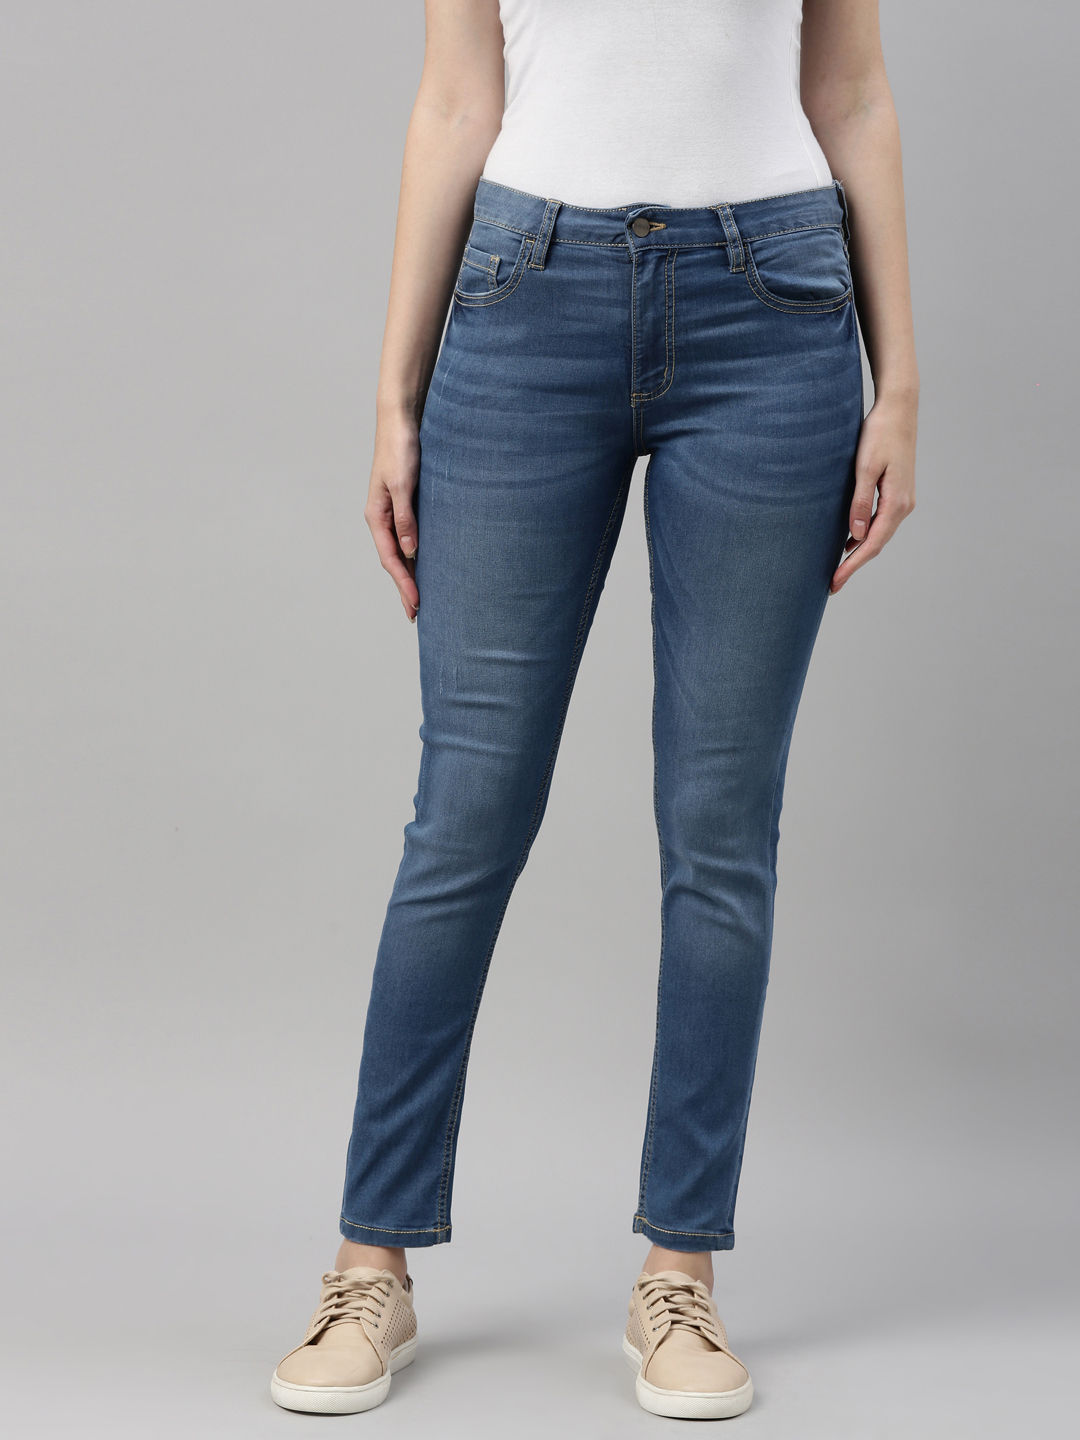 Go Colors Women Light Solid Mid Rise Skinny Jeans Blue: Buy Go Colors  Women Light Solid Mid Rise Skinny Jeans Blue Online at Best Price in  India Nykaa